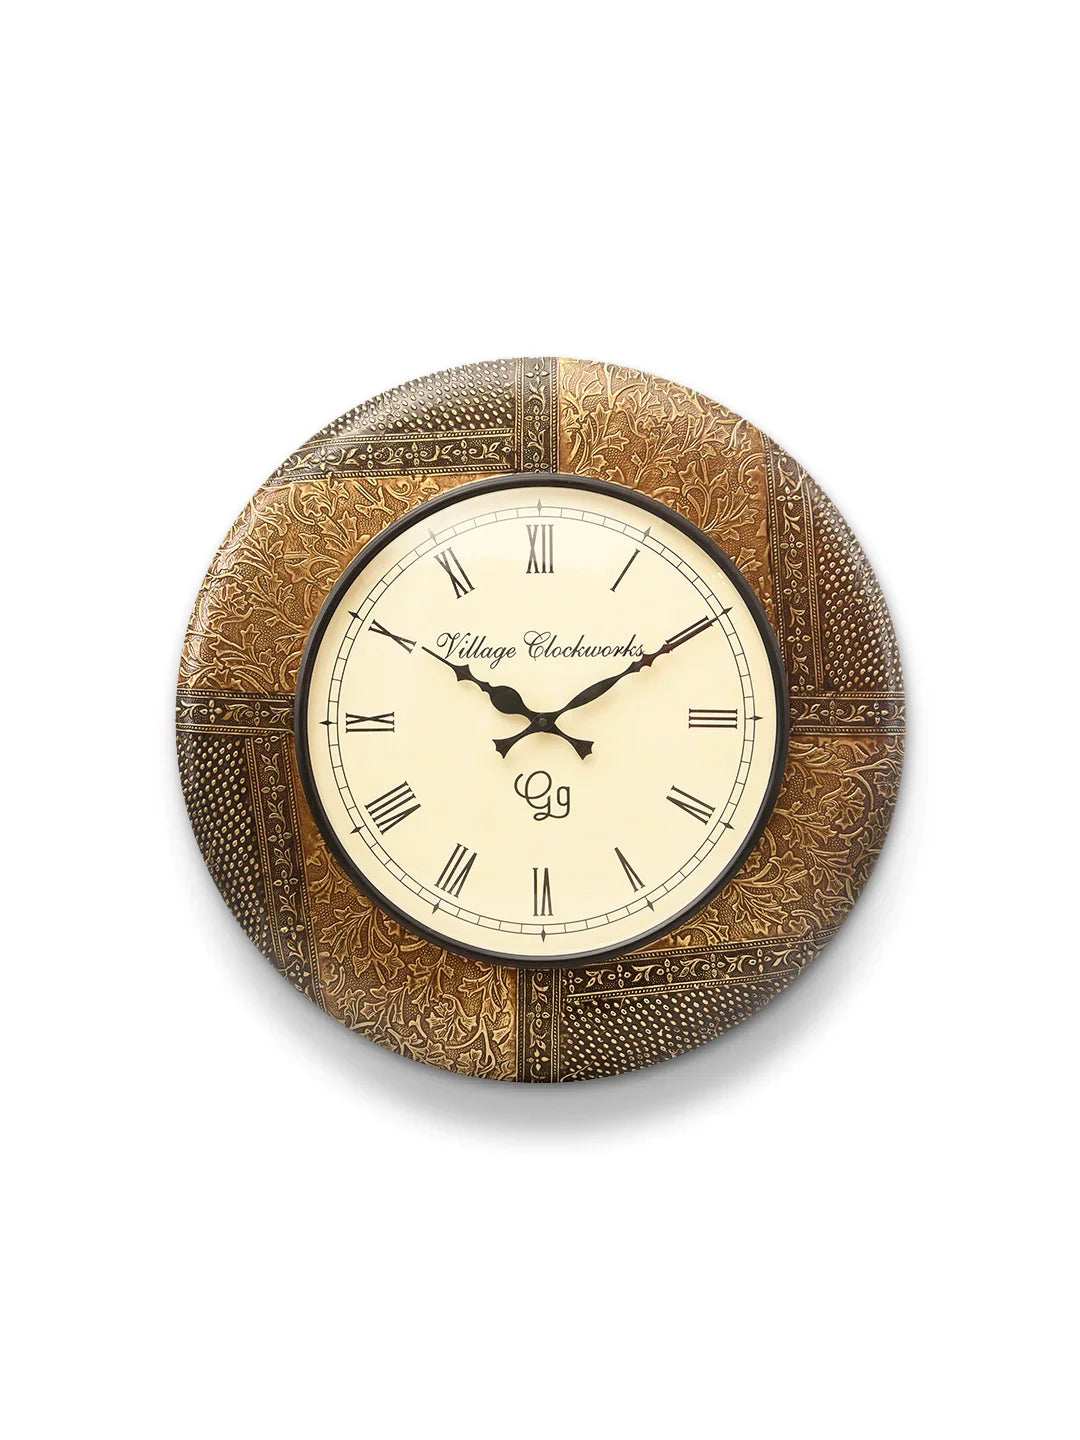 Round Embossed Brass 18 Inches Analog Wall Clock